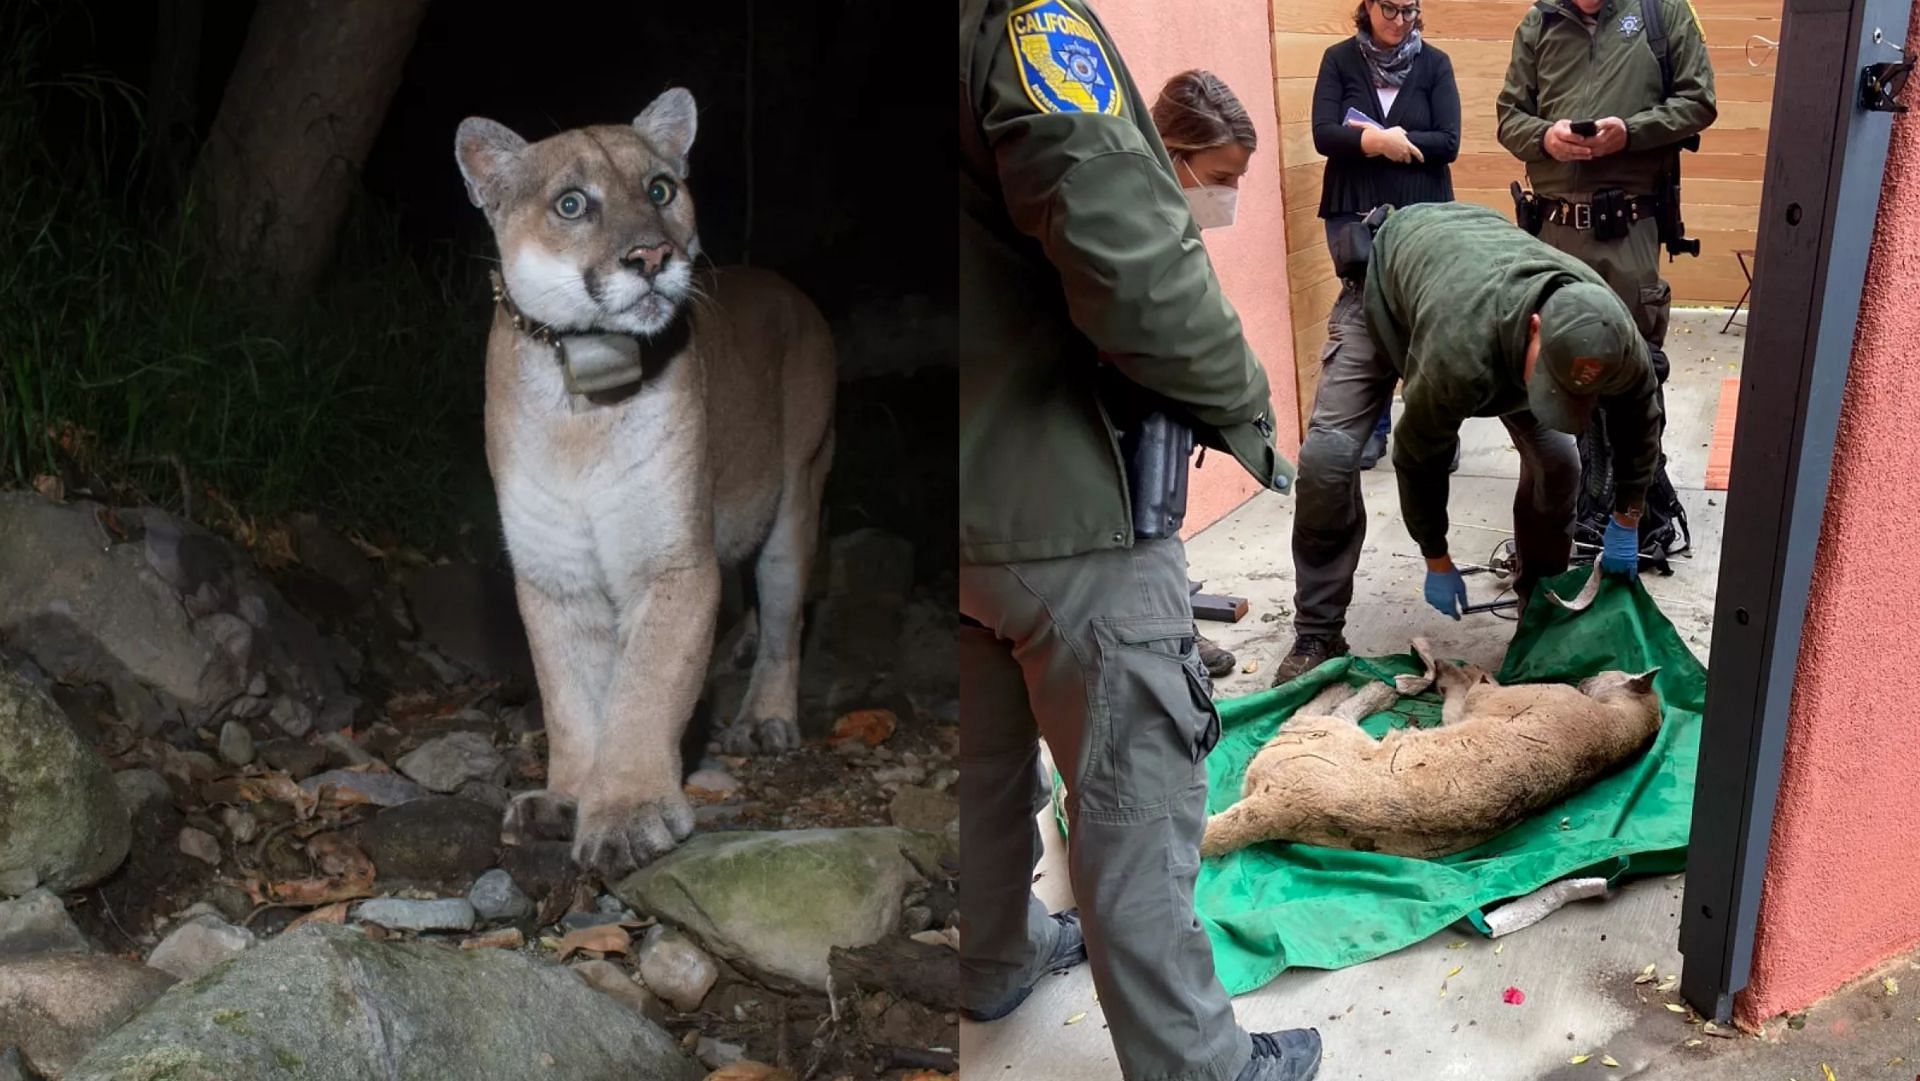 Mountain Lion dubbed as P22 has been captured by the wildlife officials in LA after it killed a dog and attacked another in the past month (Image via Miguel Ordenana/Natural History Museum, Sarah Picchi)